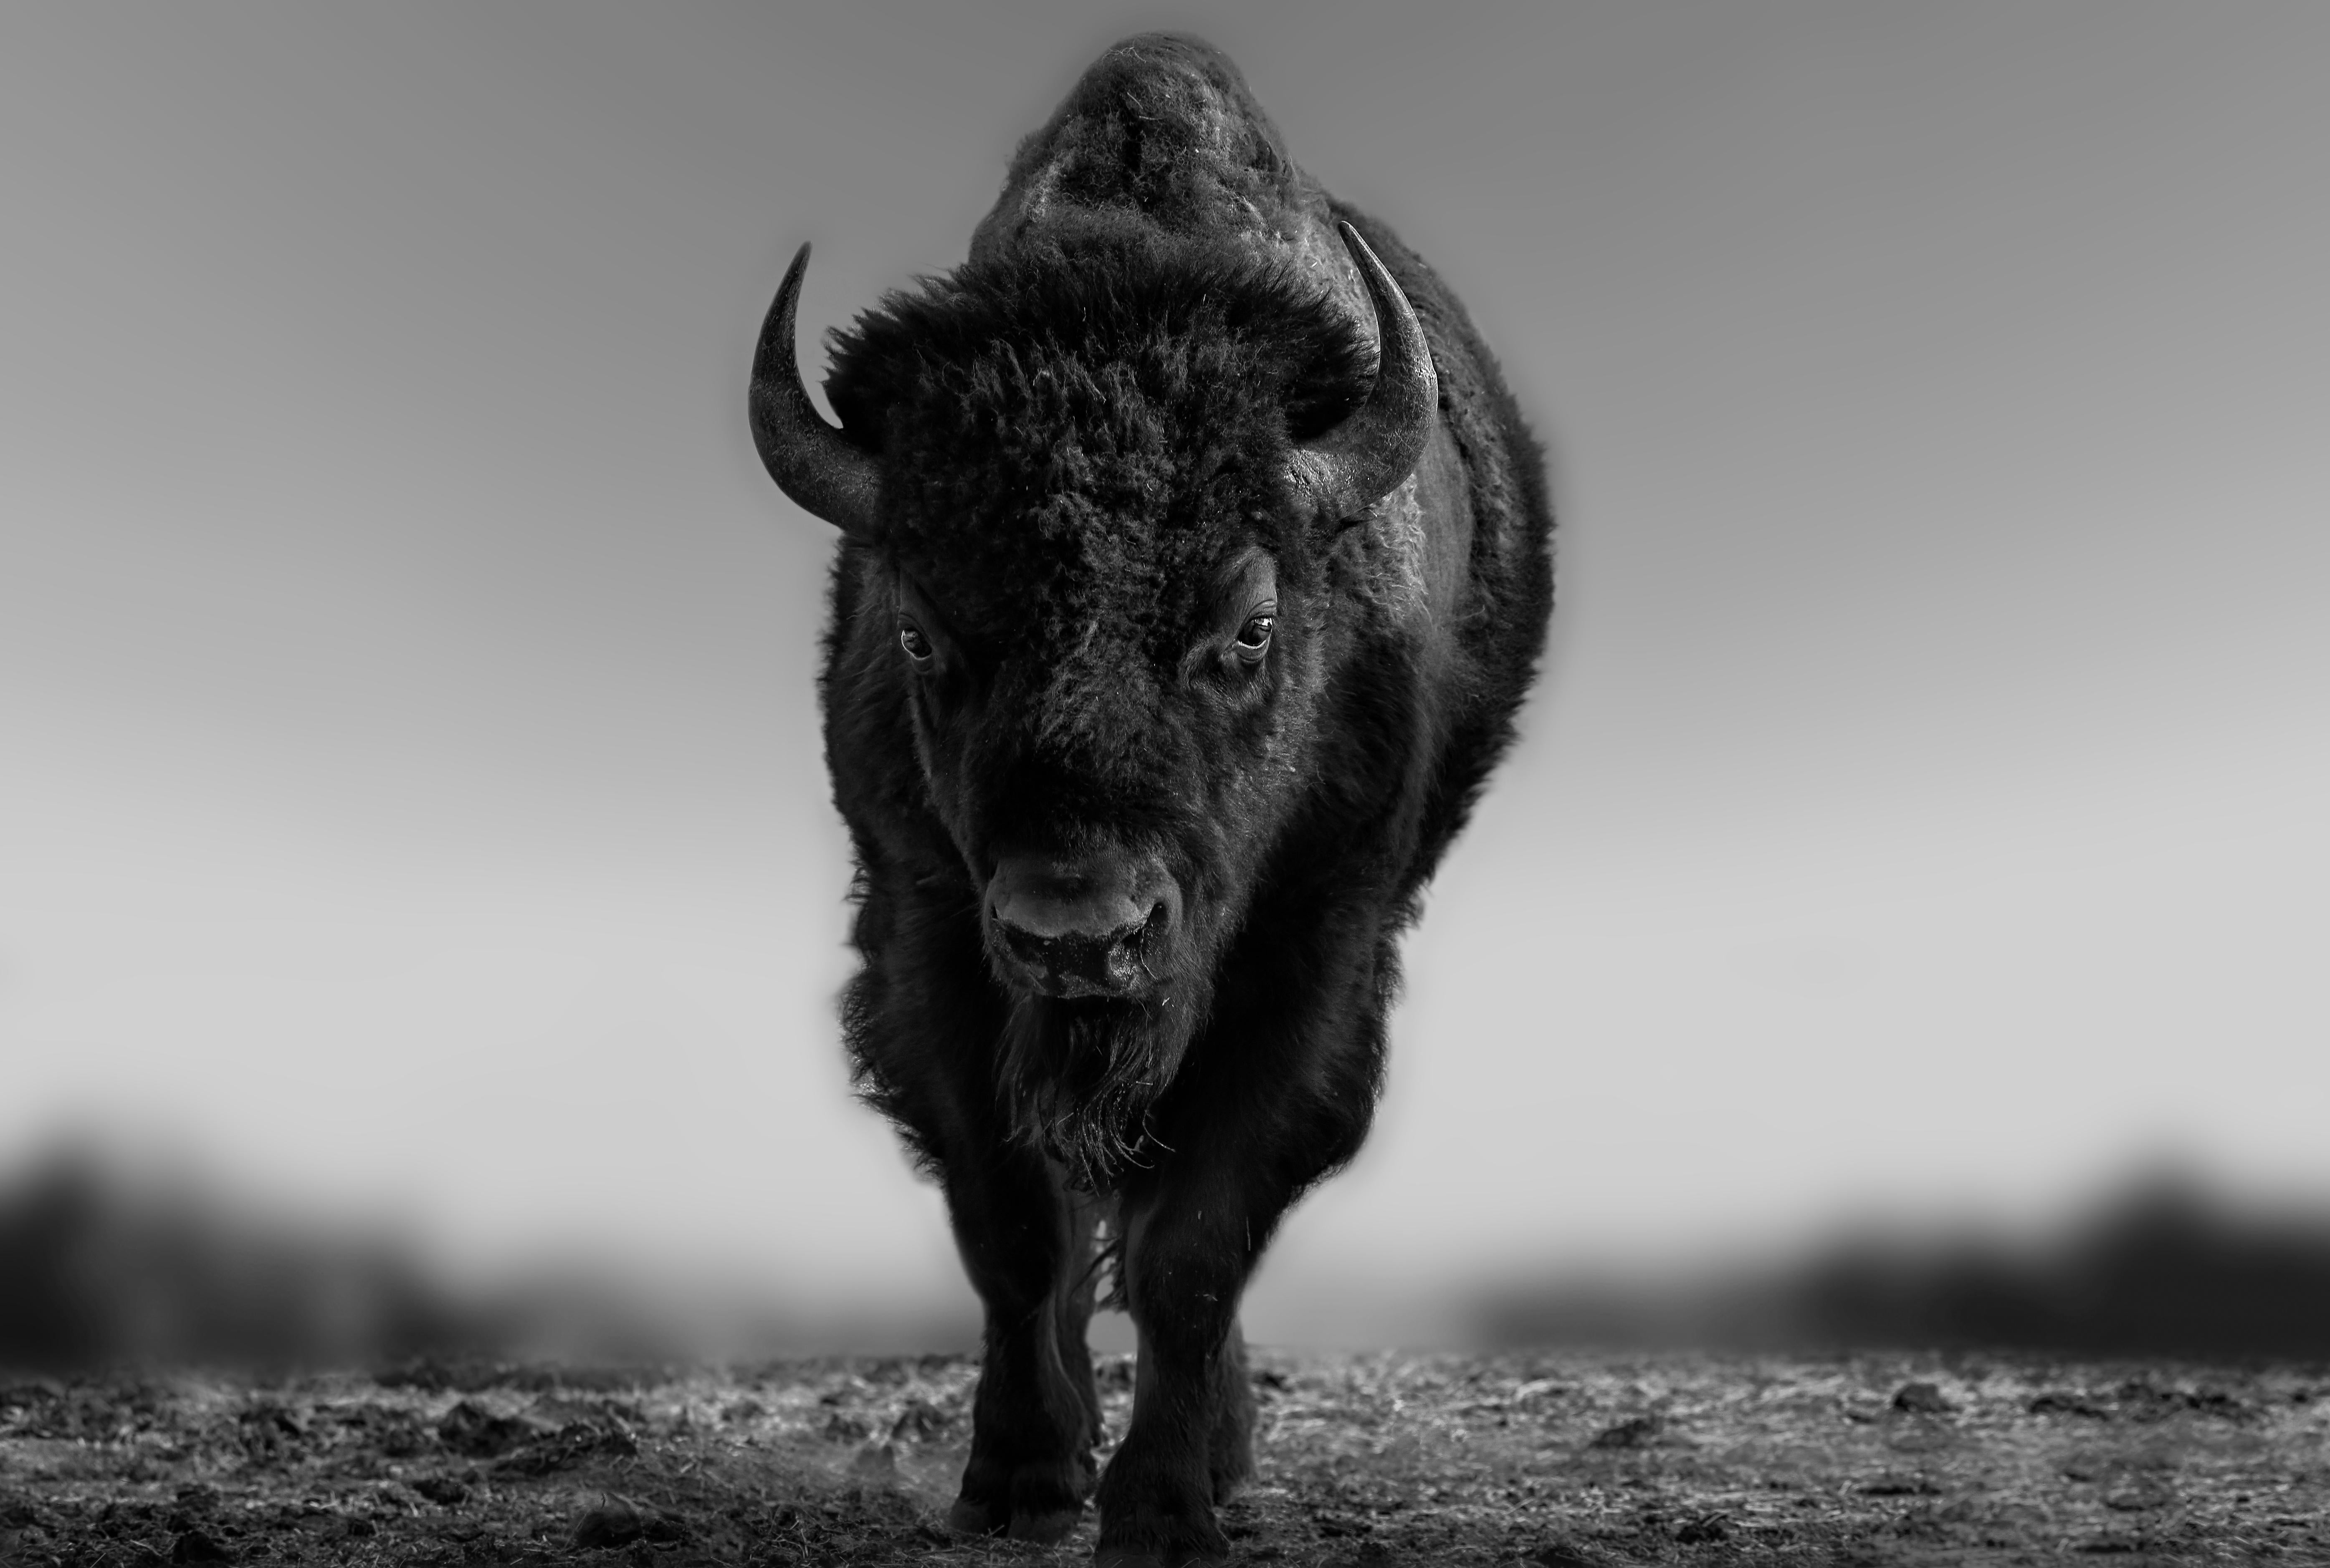 Shane Russeck Black and White Photograph - "The Beast" 36x48 -Black & White Photograph of Bison Unsigned Test Print